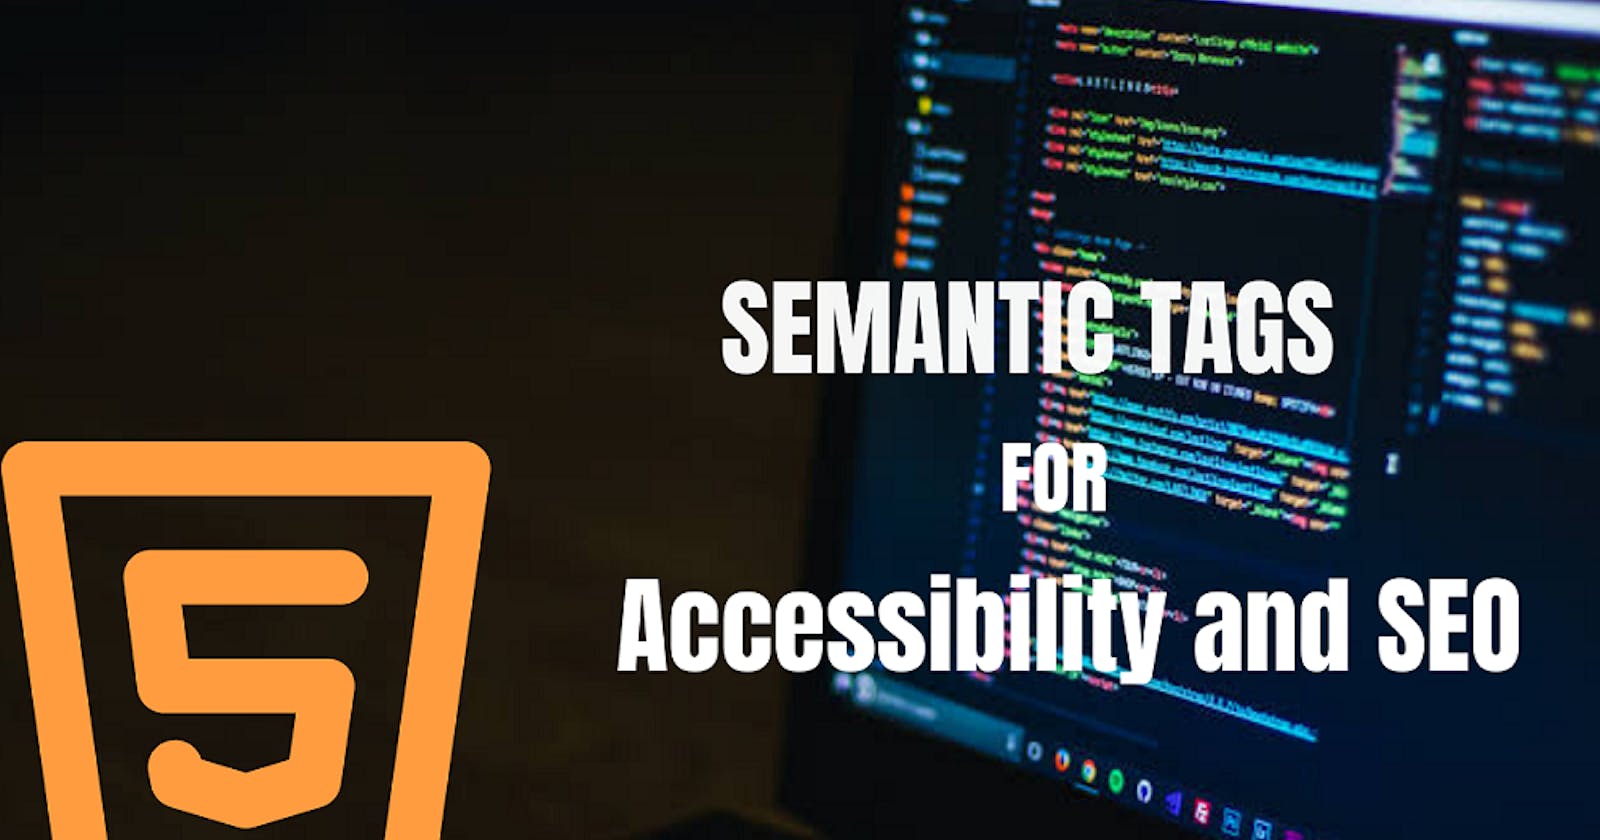 How to  build an accessible and SEO friendly website using semantic HTML tags